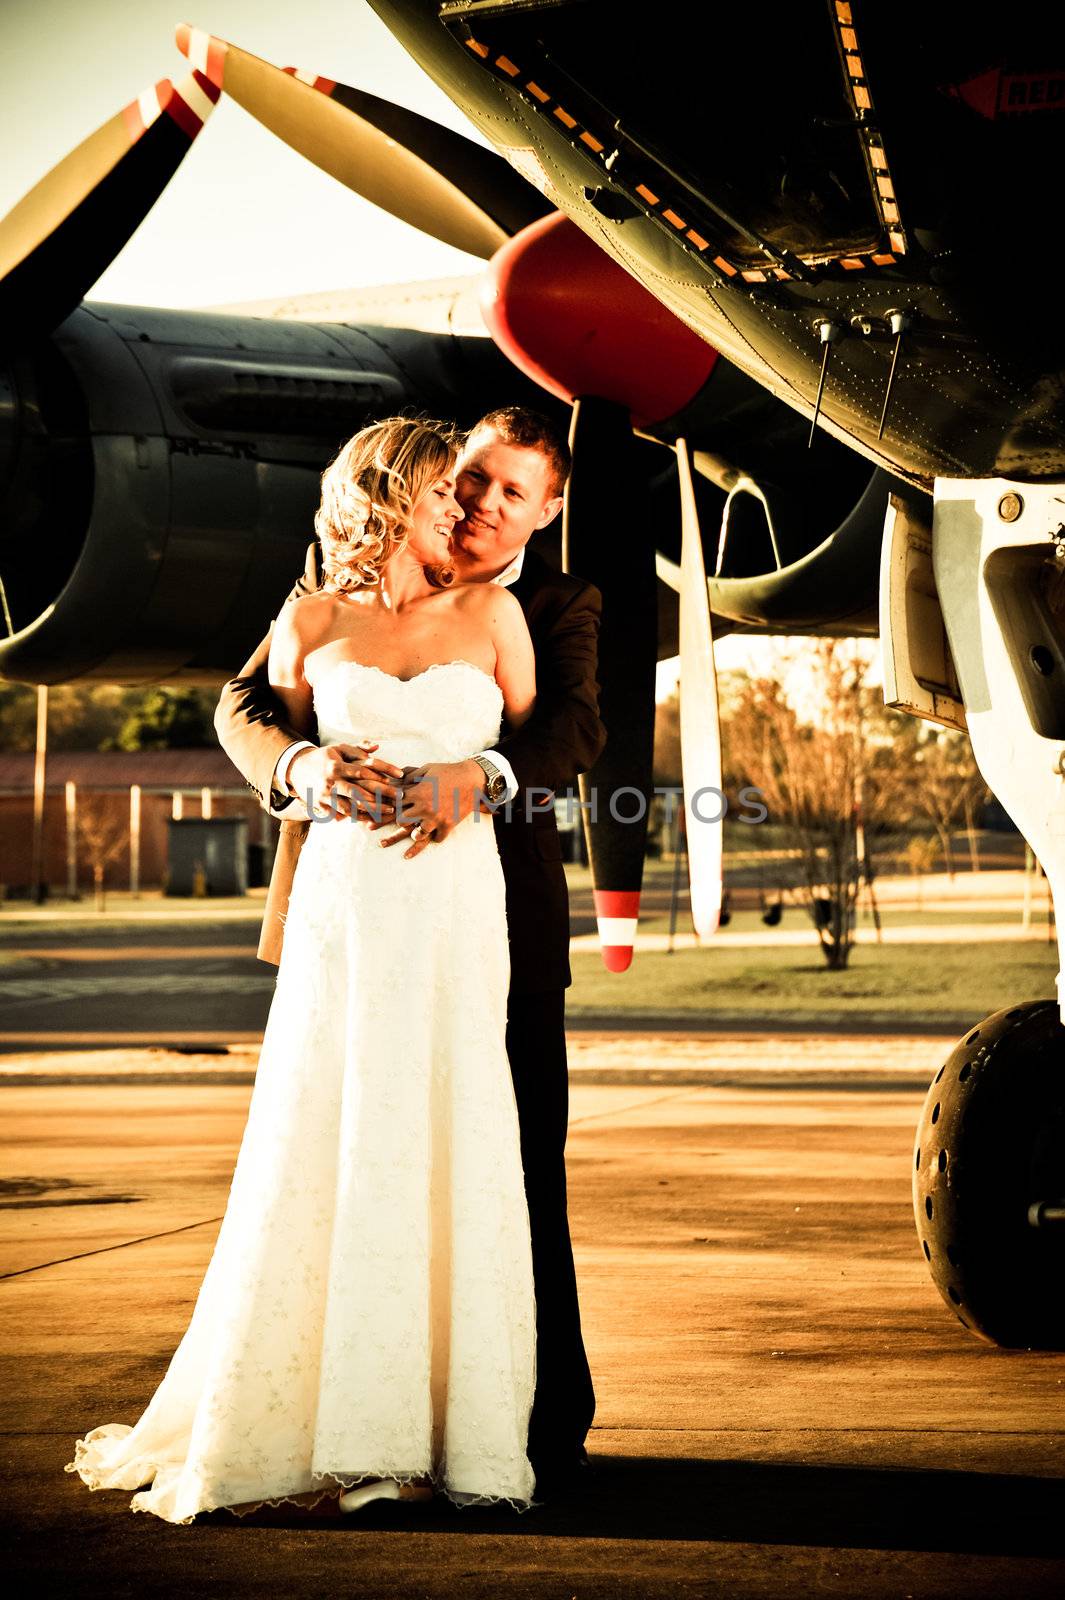 sexy young adult wedding couple standing with old war aircraft by Ansunette